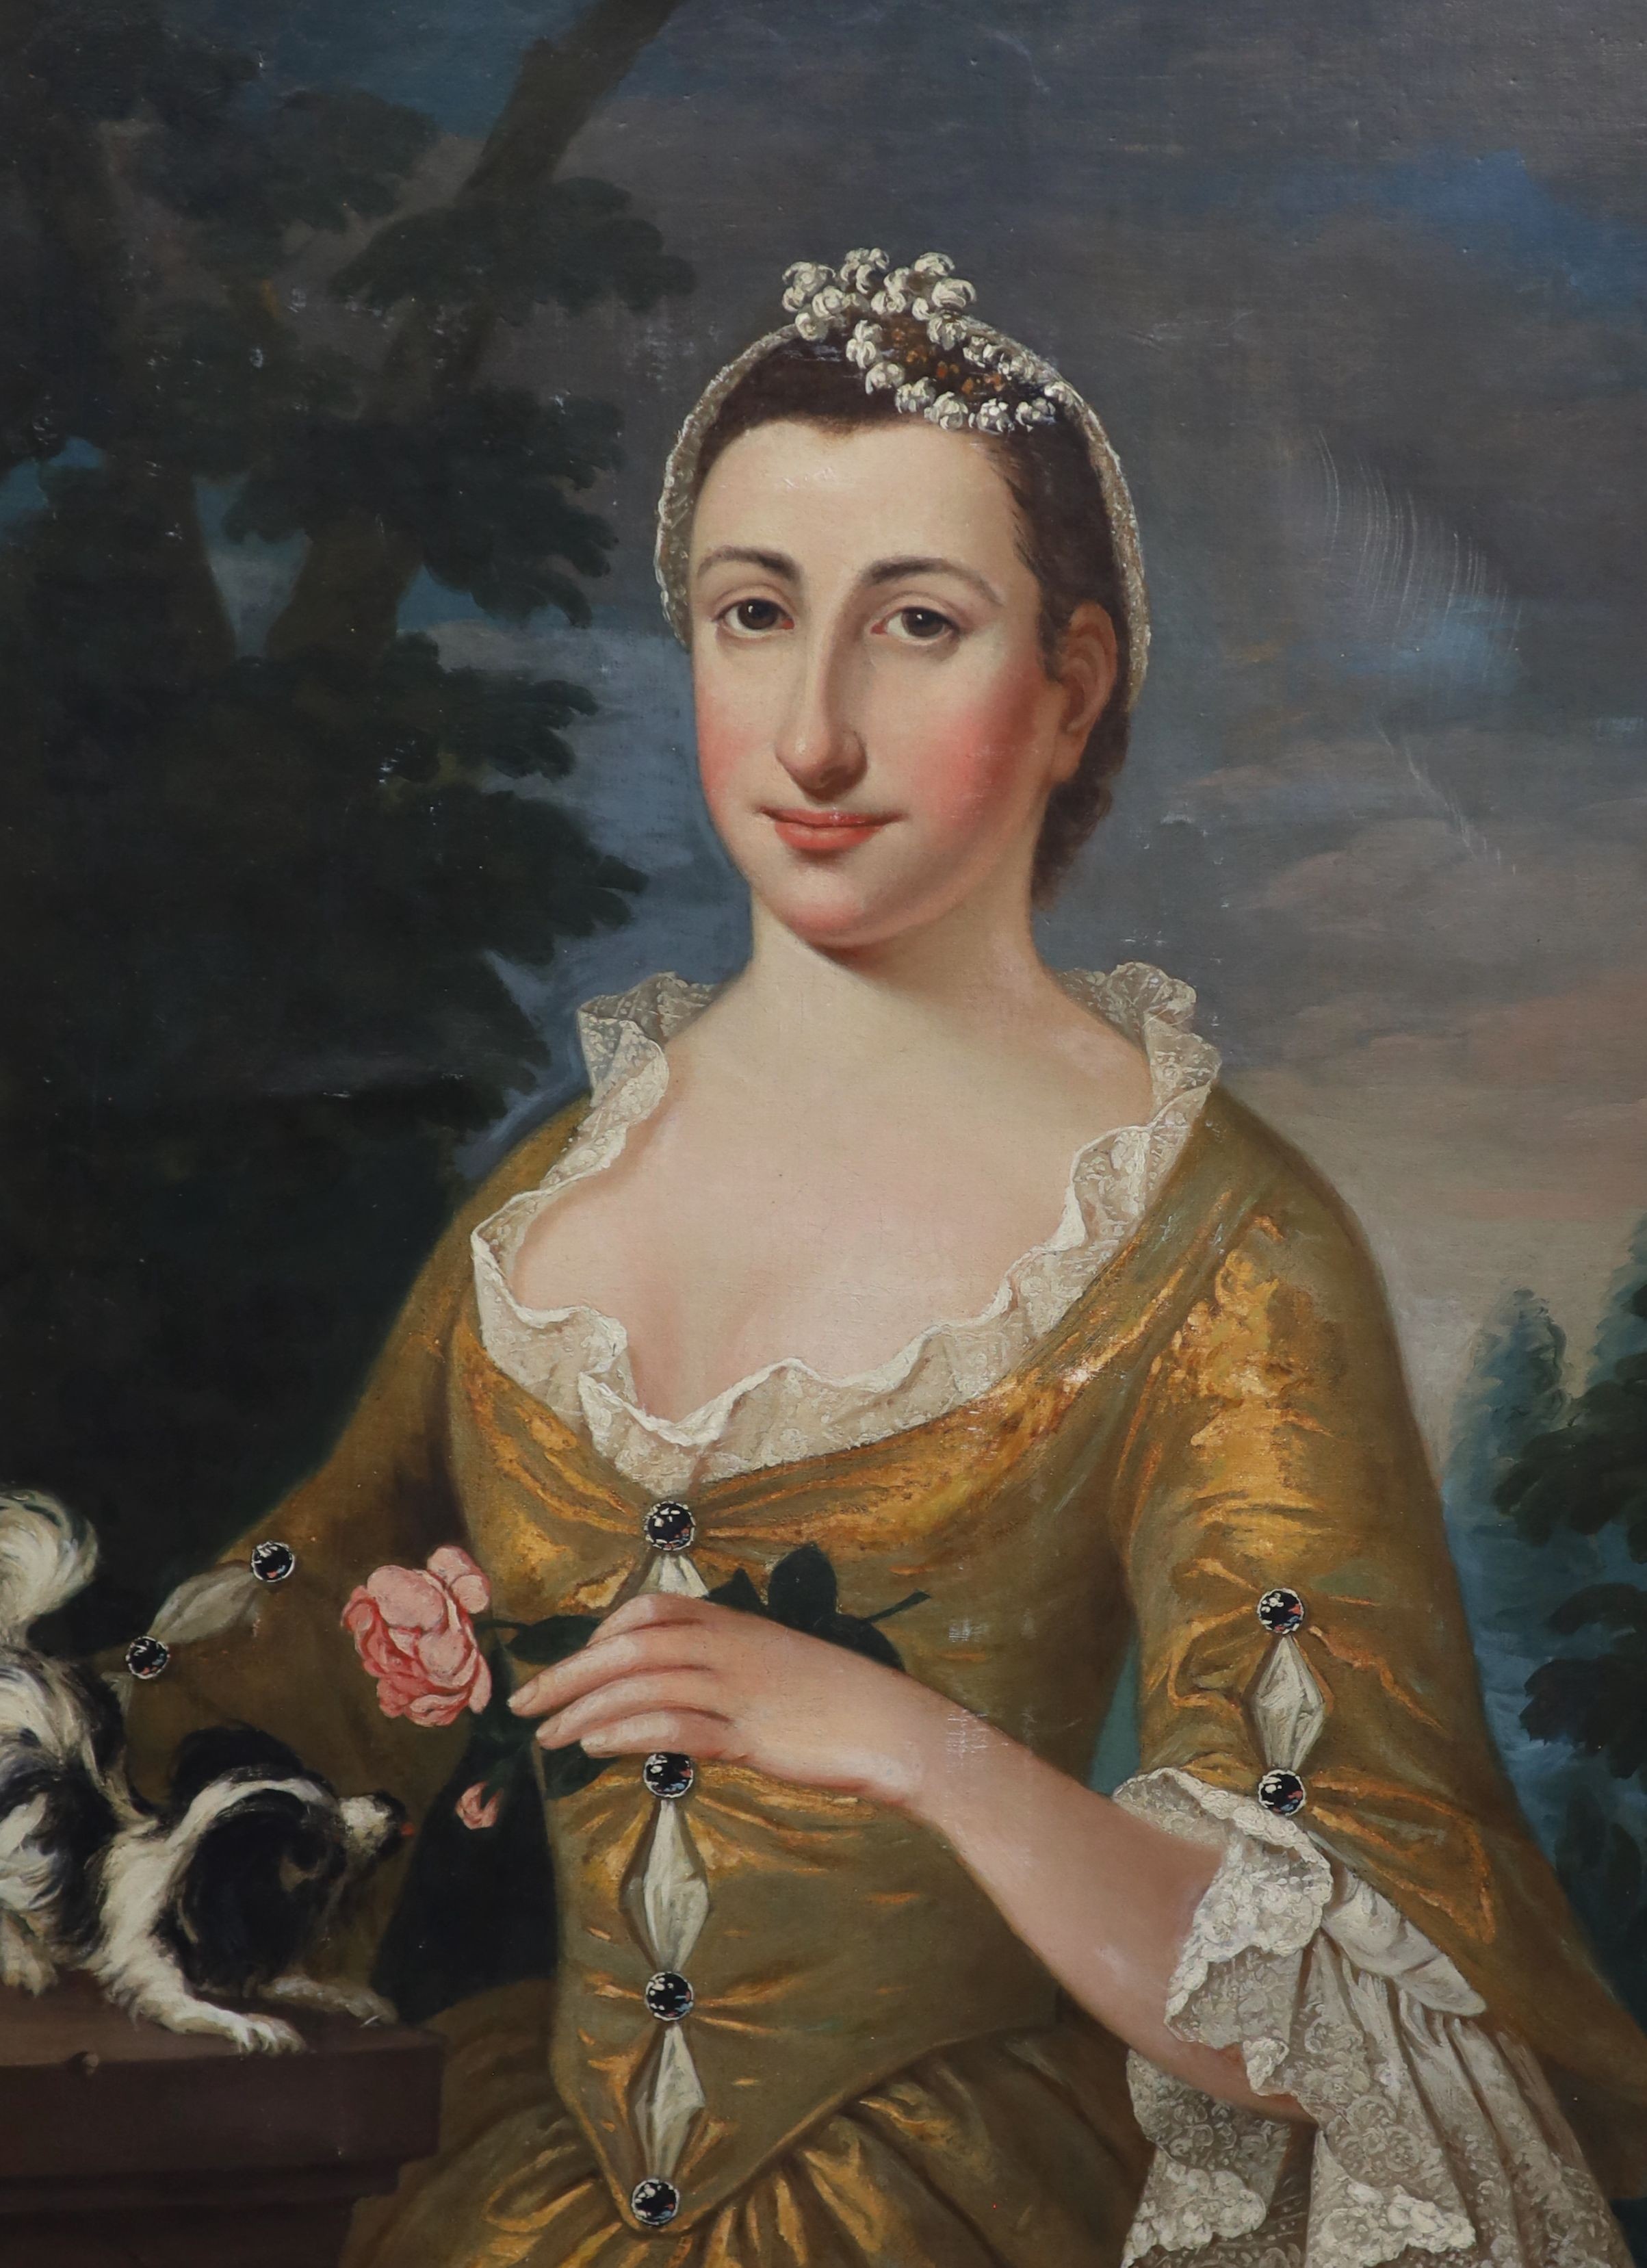 Early 18th century French School, Portrait of a lady wearing a yellow dress holding a rose with a lap dog beside her, oil on canvas, 82 x 62cm